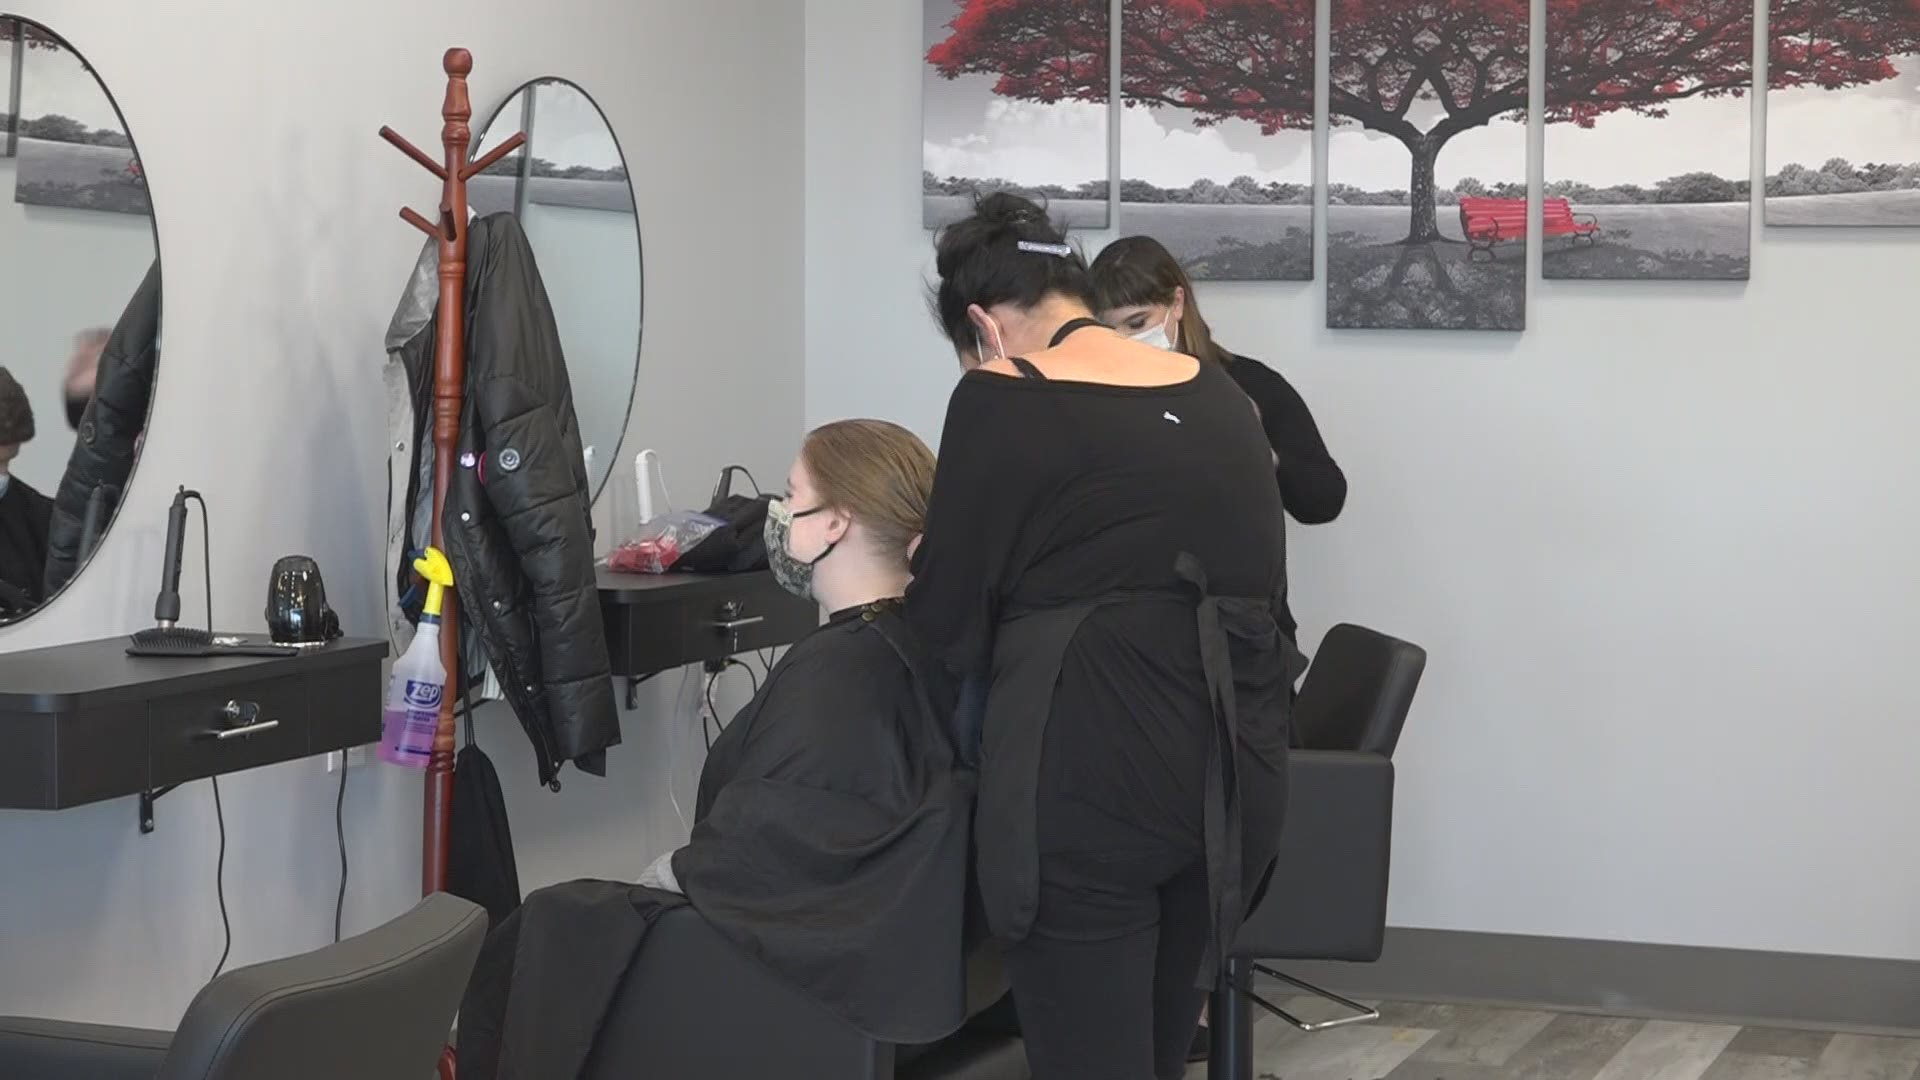 The cut-a-thon benefited a young South Portland mother who suffered a serious stroke just before Christmas.